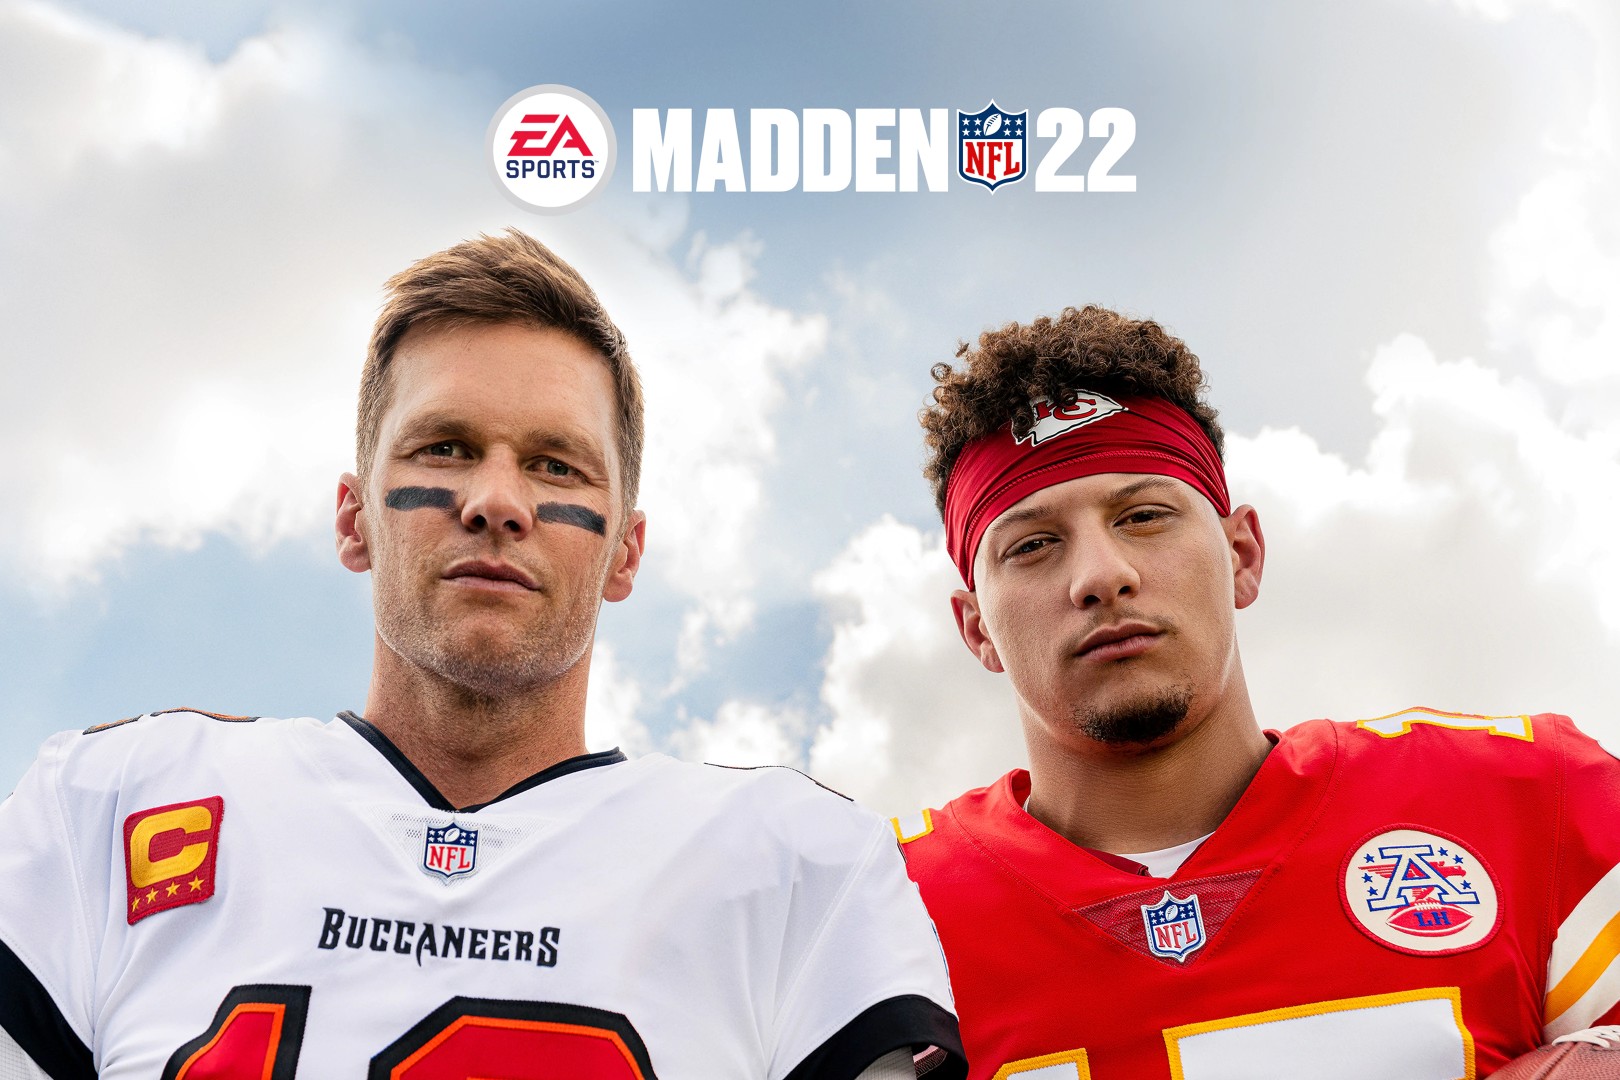 new madden cover 2022